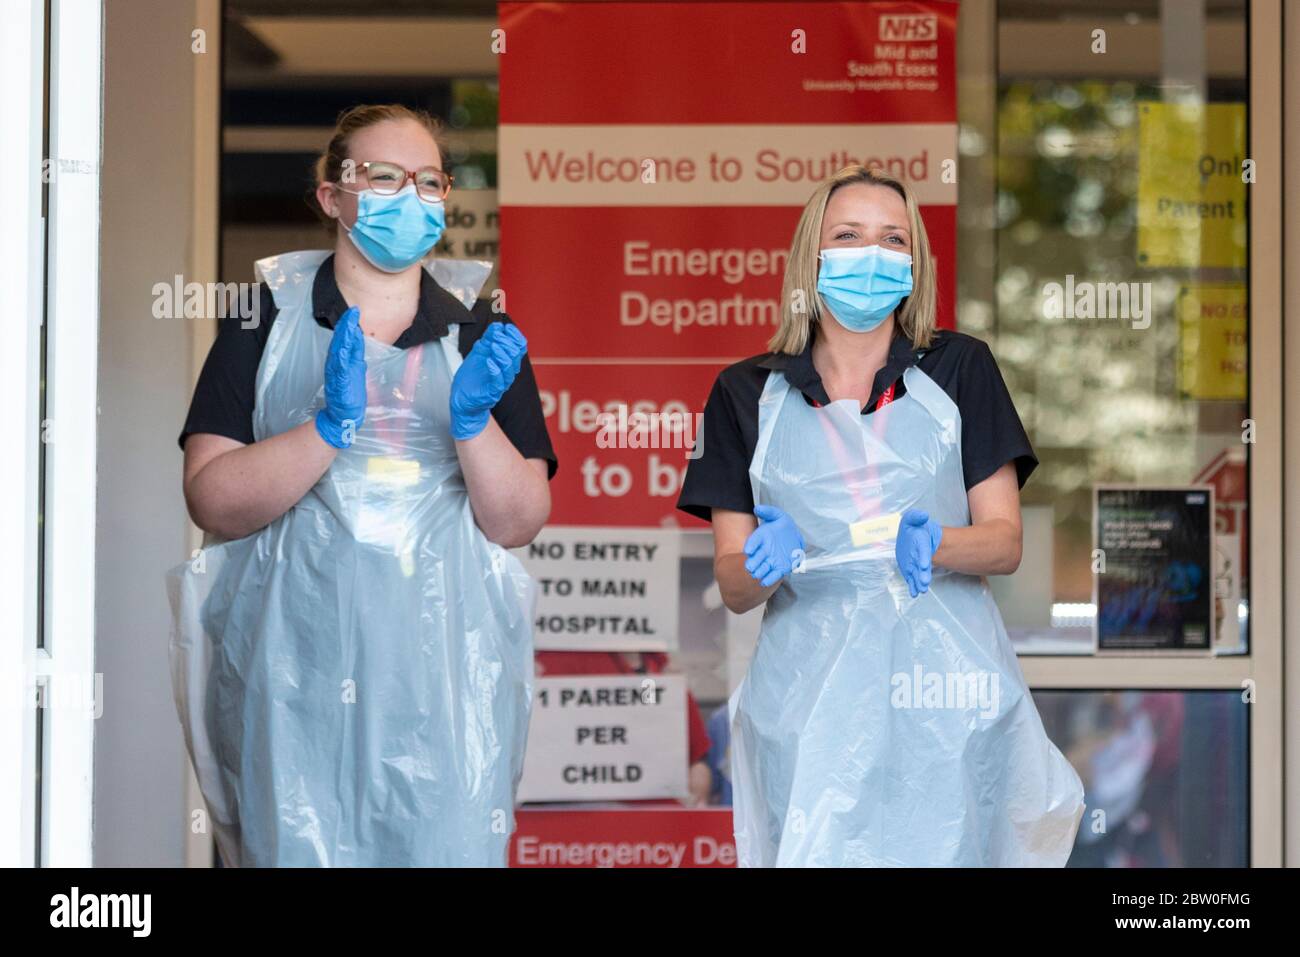 Southend University Hospital, Southend on Sea, Essex, UK. 28th May, 2020. The final ‘Clap for Carers’ has been held at 8pm on Thursday evening to thank NHS and key workers during the COVID-19 Coronavirus pandemic. NHS staff joining in with the applause Stock Photo